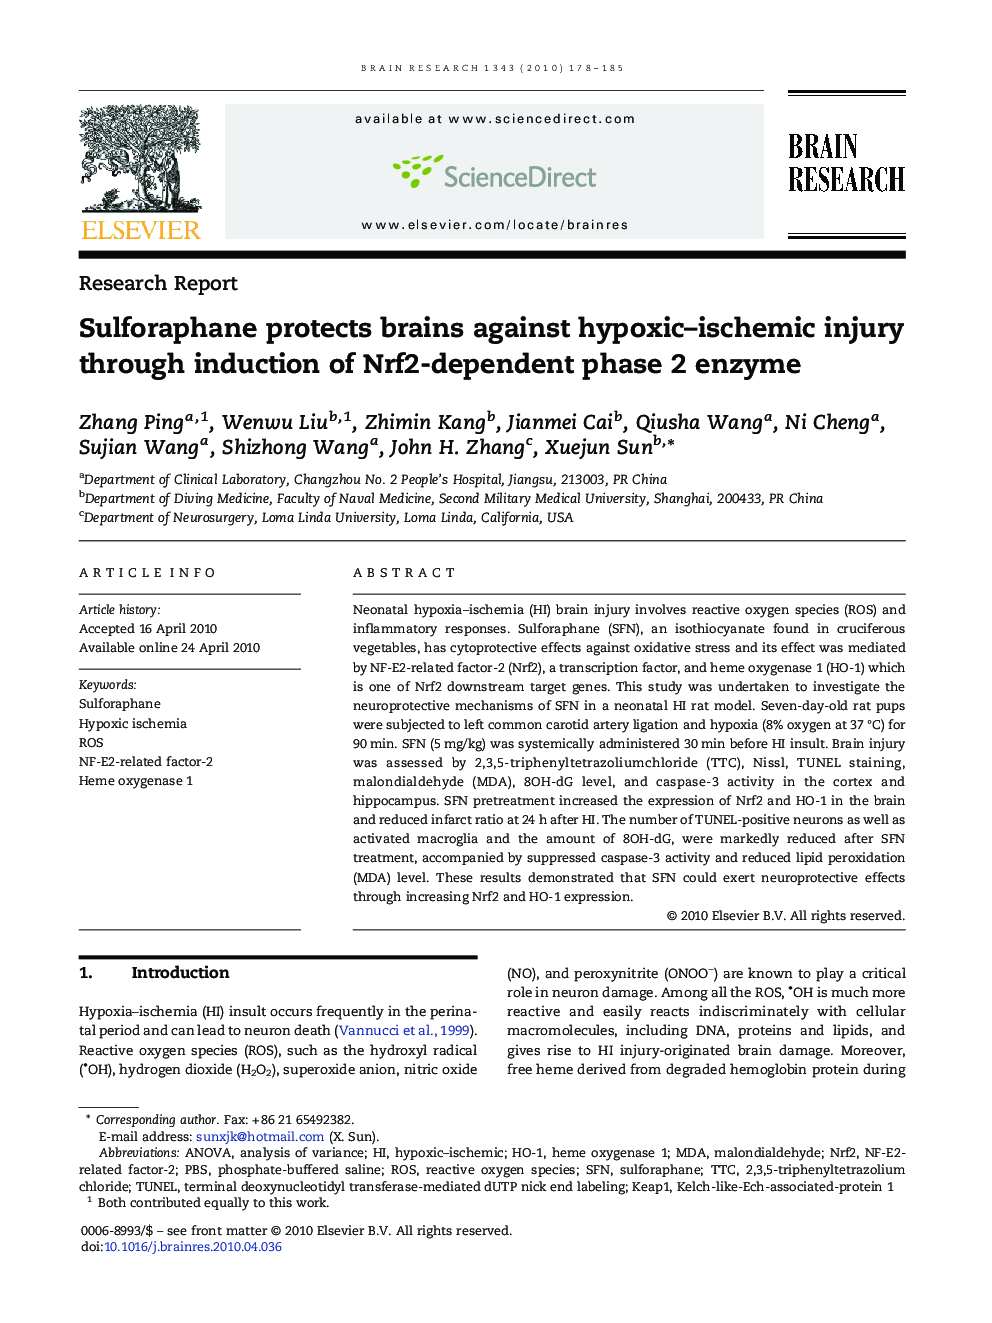 Sulforaphane protects brains against hypoxic–ischemic injury through induction of Nrf2-dependent phase 2 enzyme